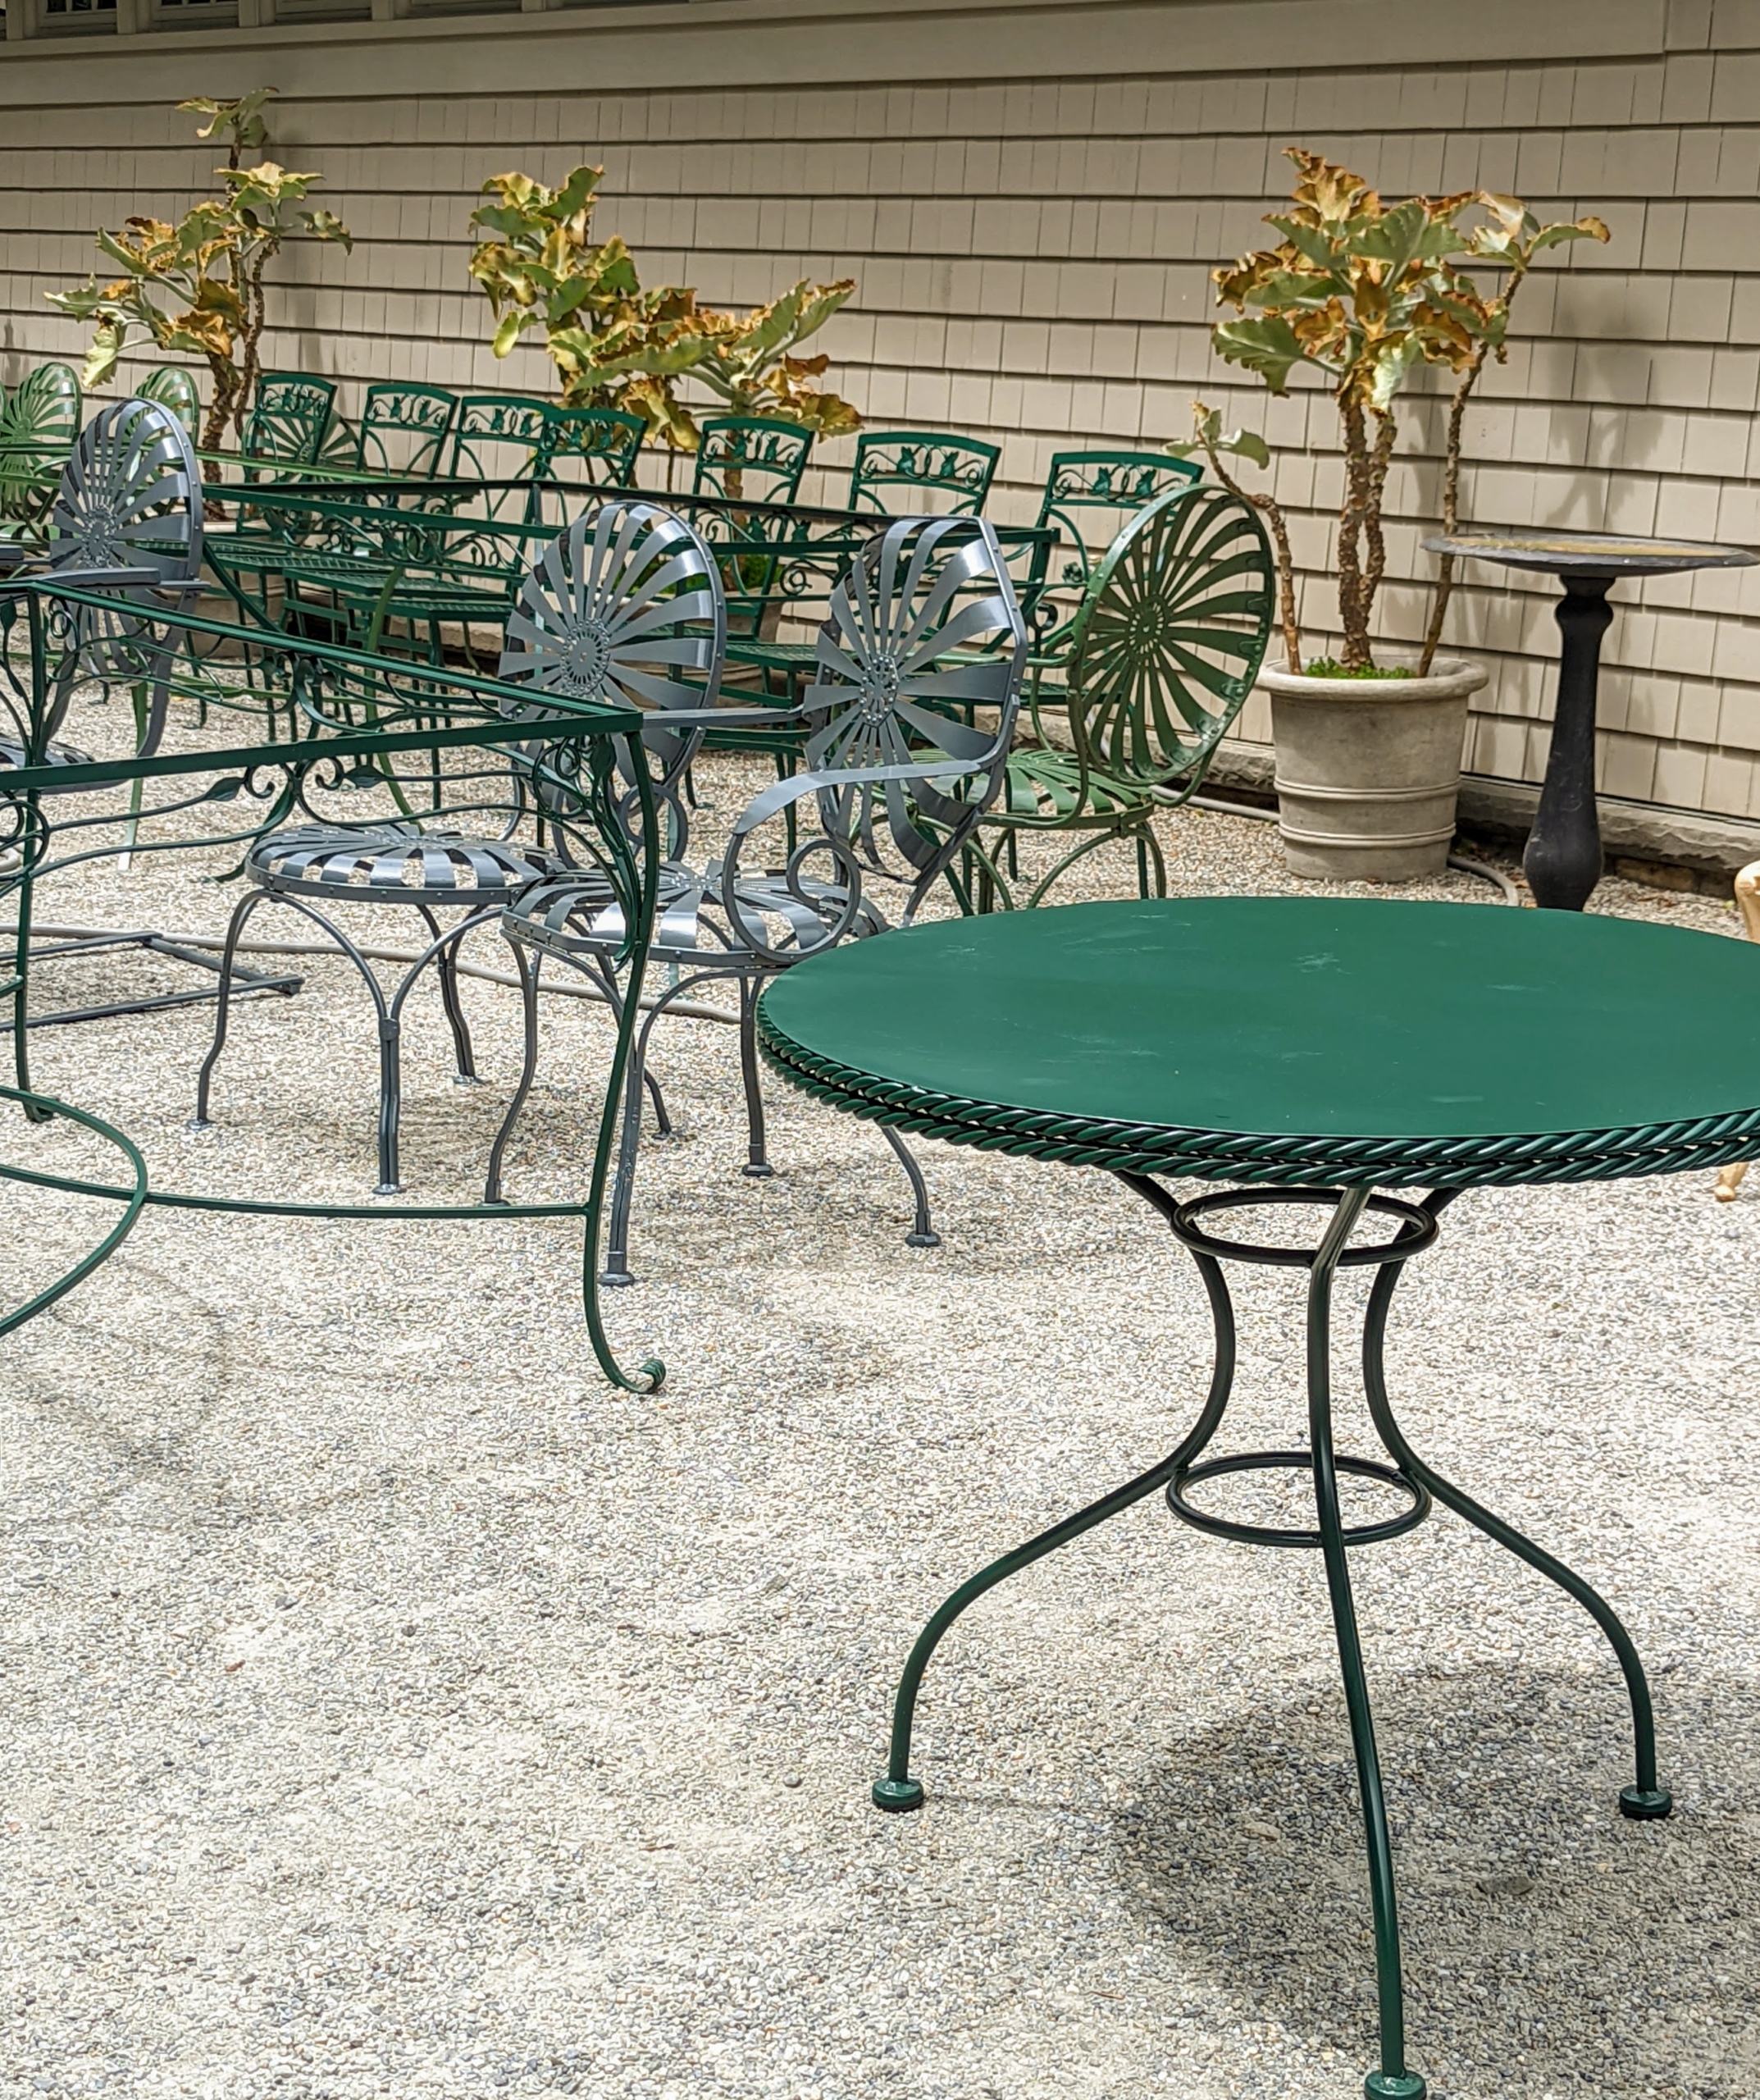 How to spray paint metal garden furniture - Celtic Sustainables